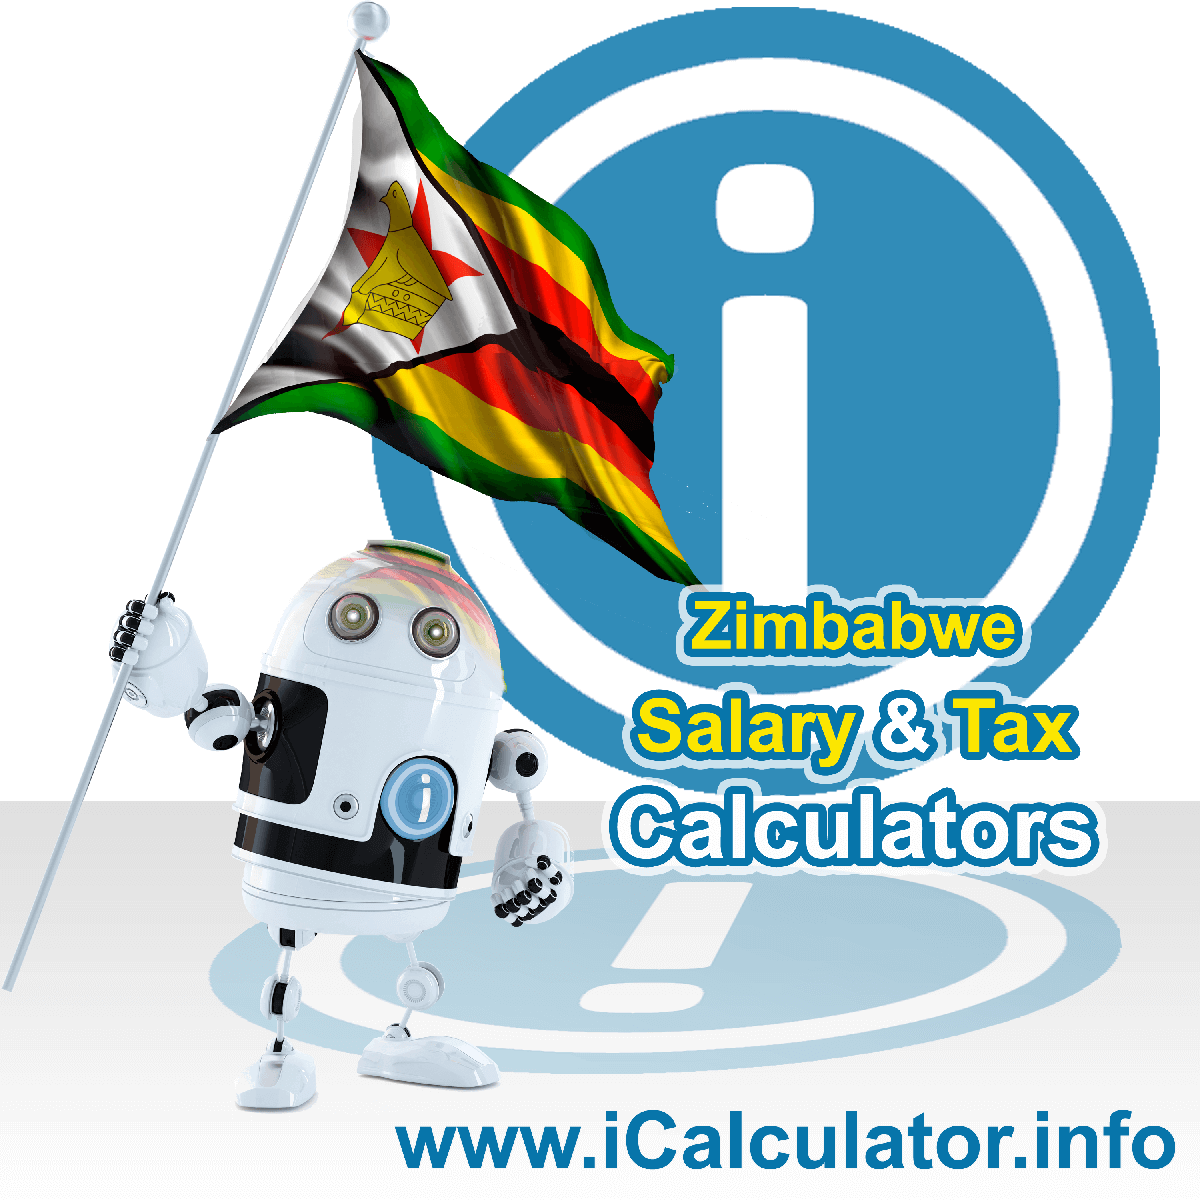 Zimbabwe Salary Calculator. This image shows the Zimbabweese flag and information relating to the tax formula for the Zimbabwe Tax Calculator